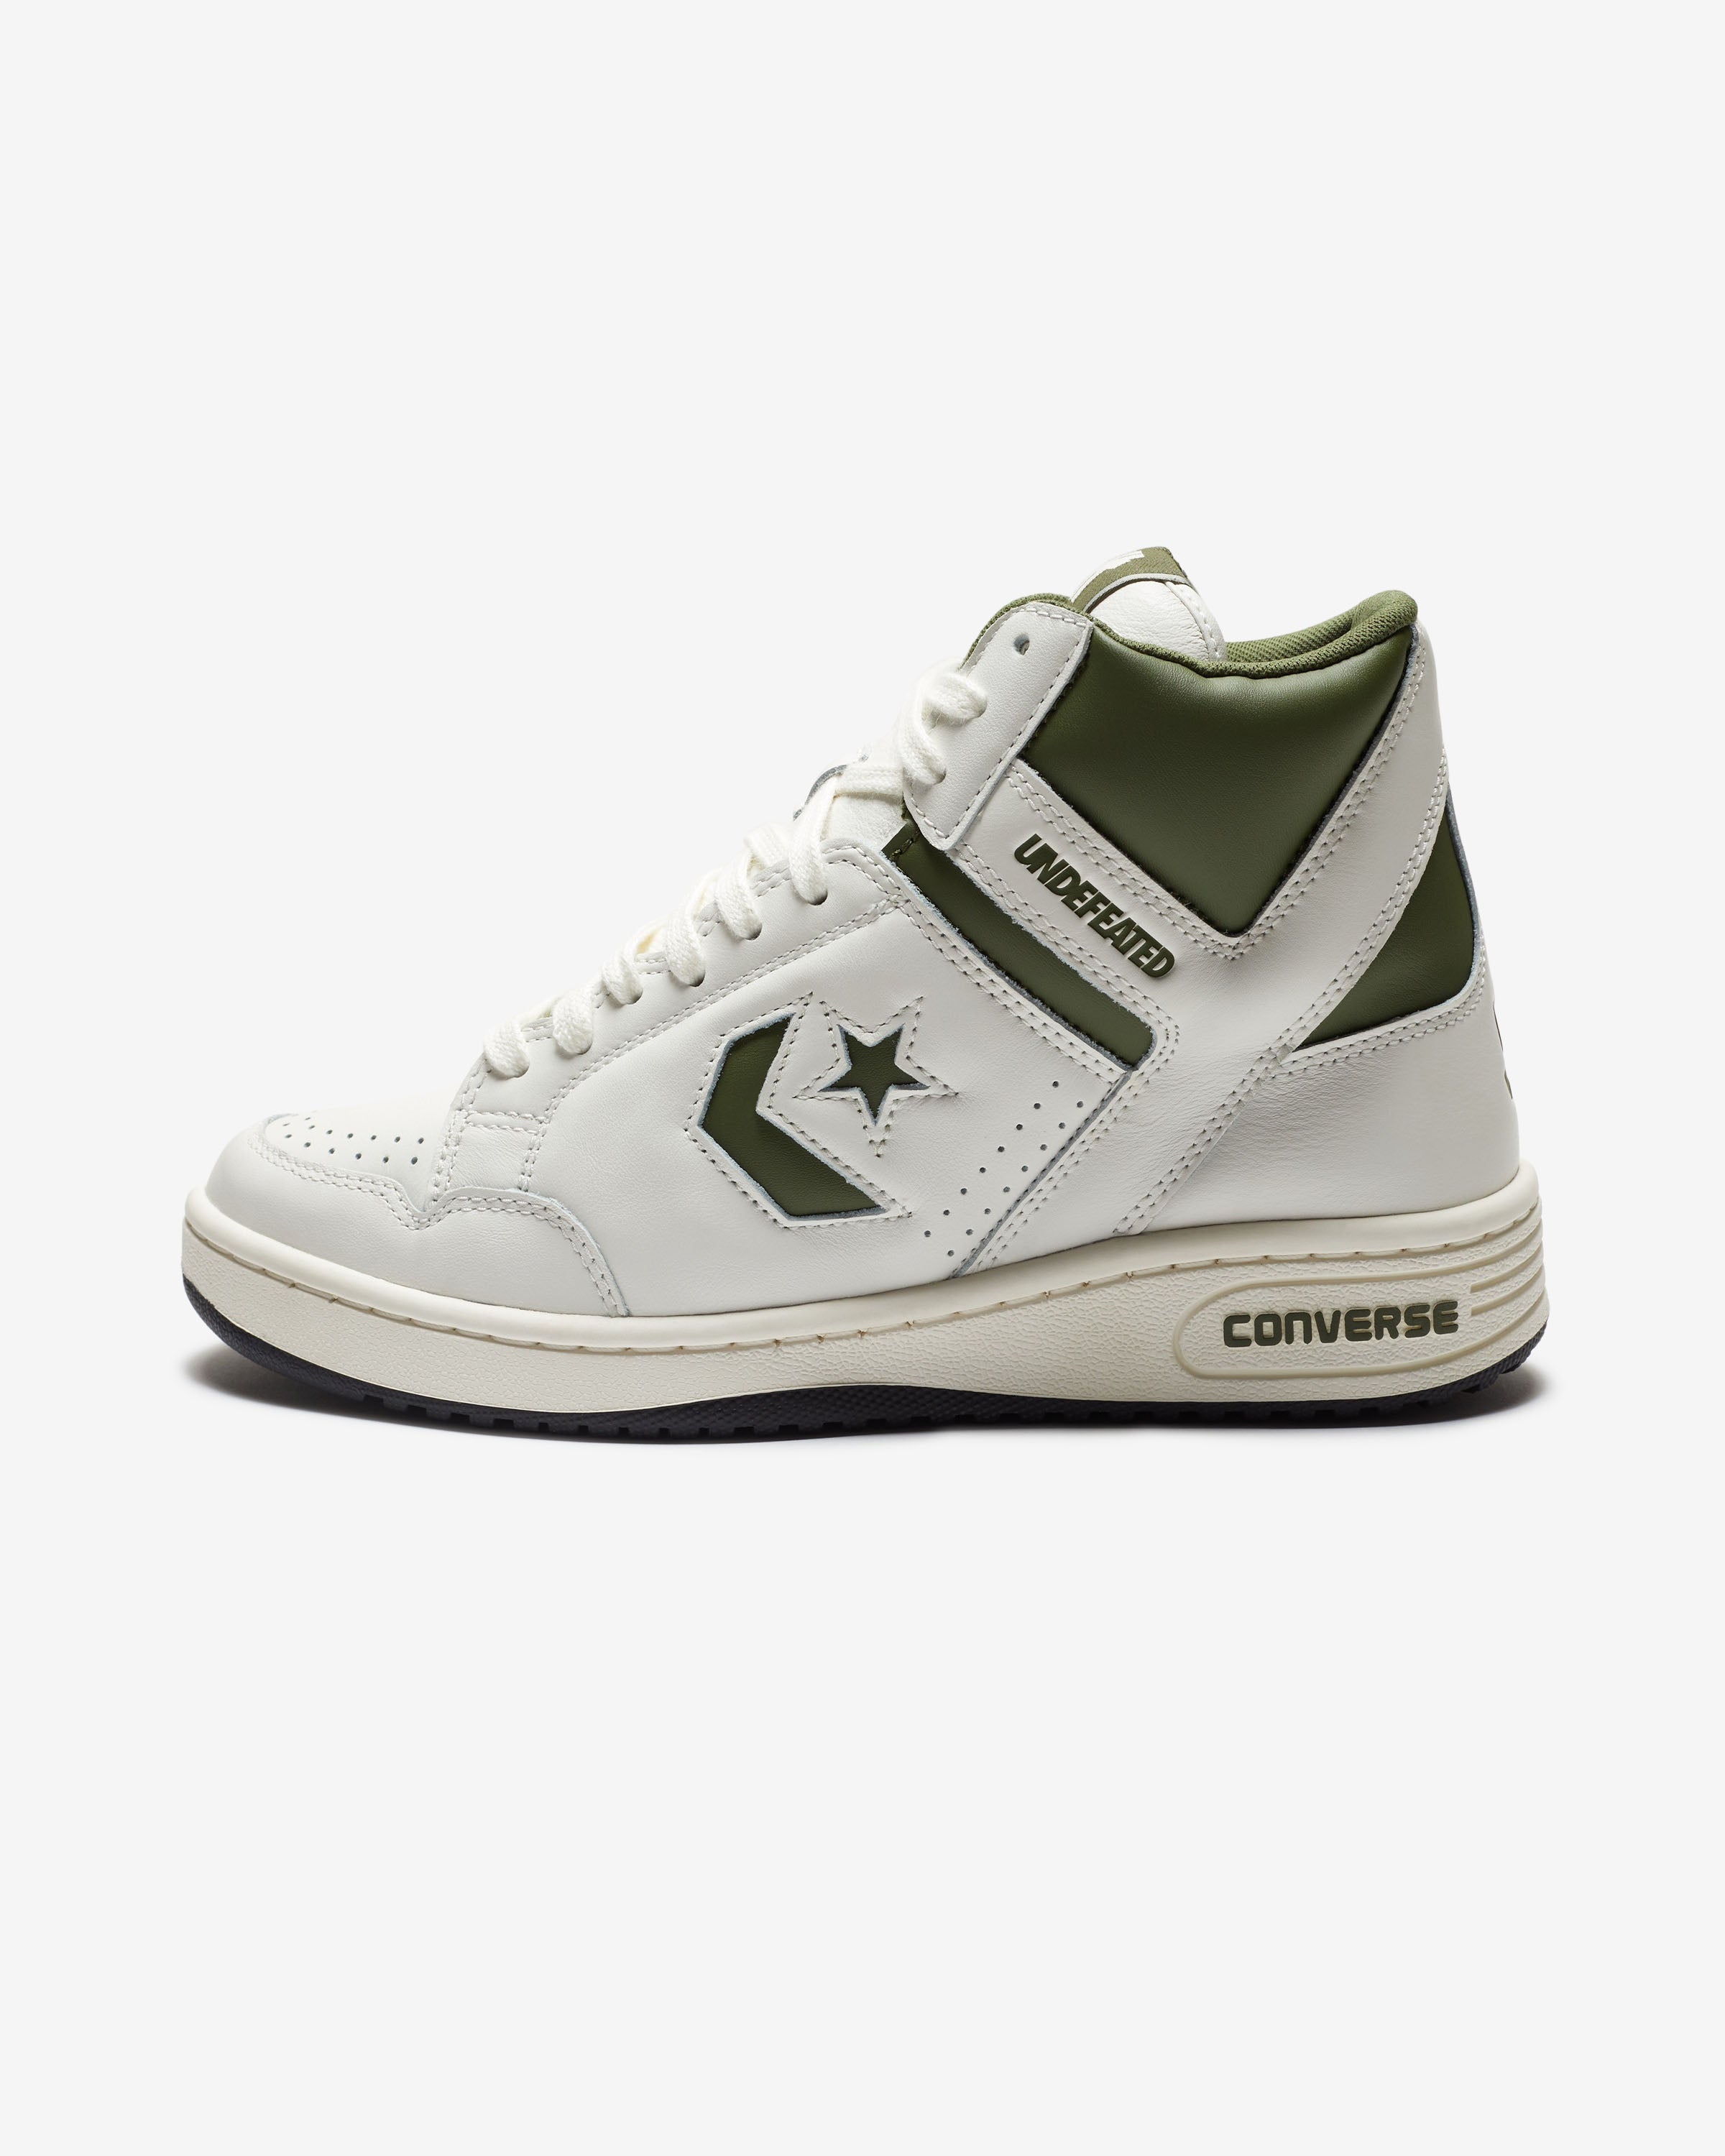 UNDEFEATED X CONVERSE WEAPON MID - VINTAGEWHITE/ CHIVE – Undefeated